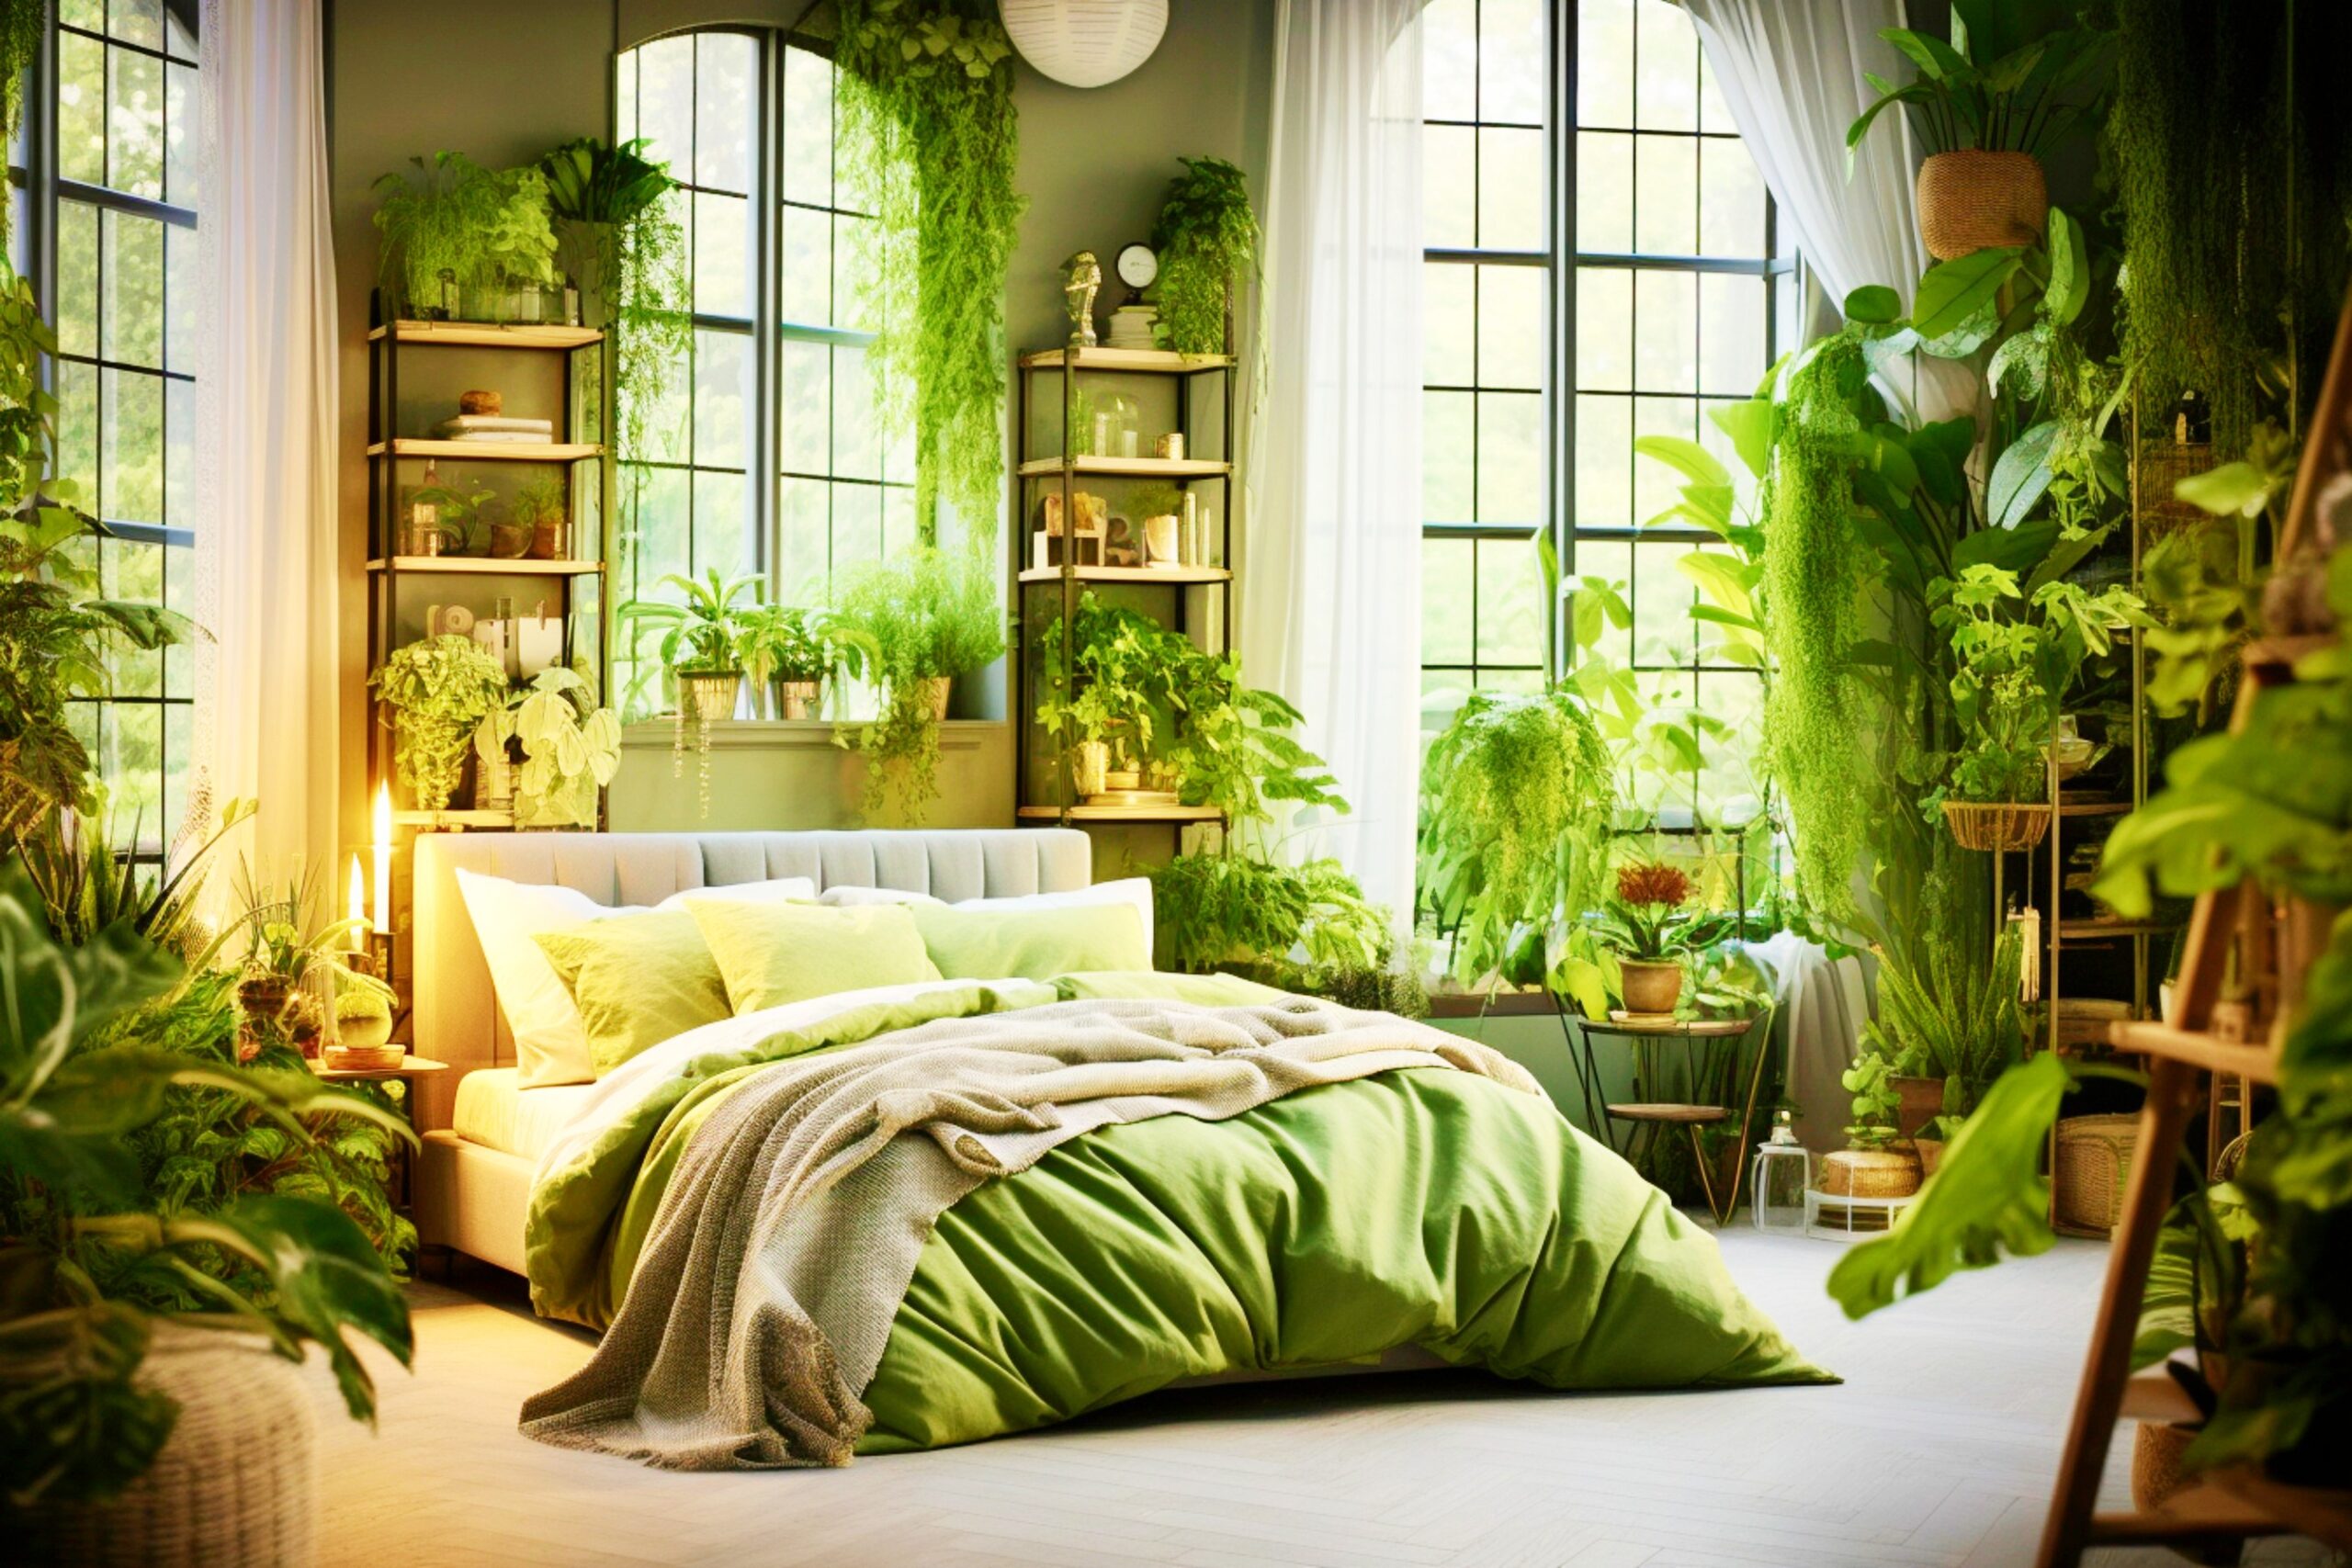 <img src="green plant.jpg" alt="green plant themed bedroom with candles"/>